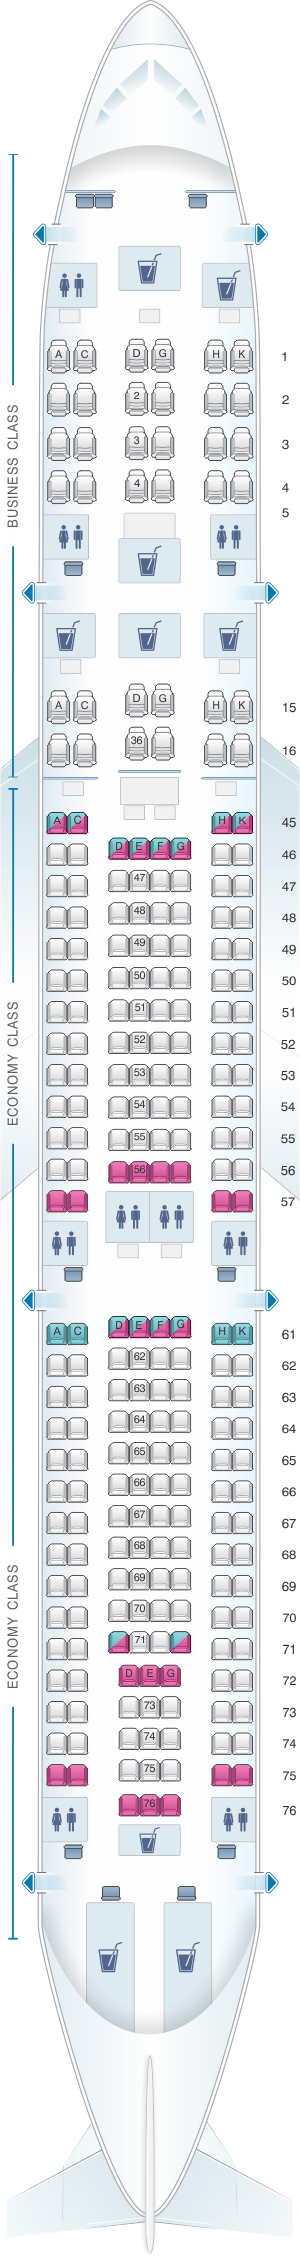 Seat map for South African Airways Airbus A340 300 V2